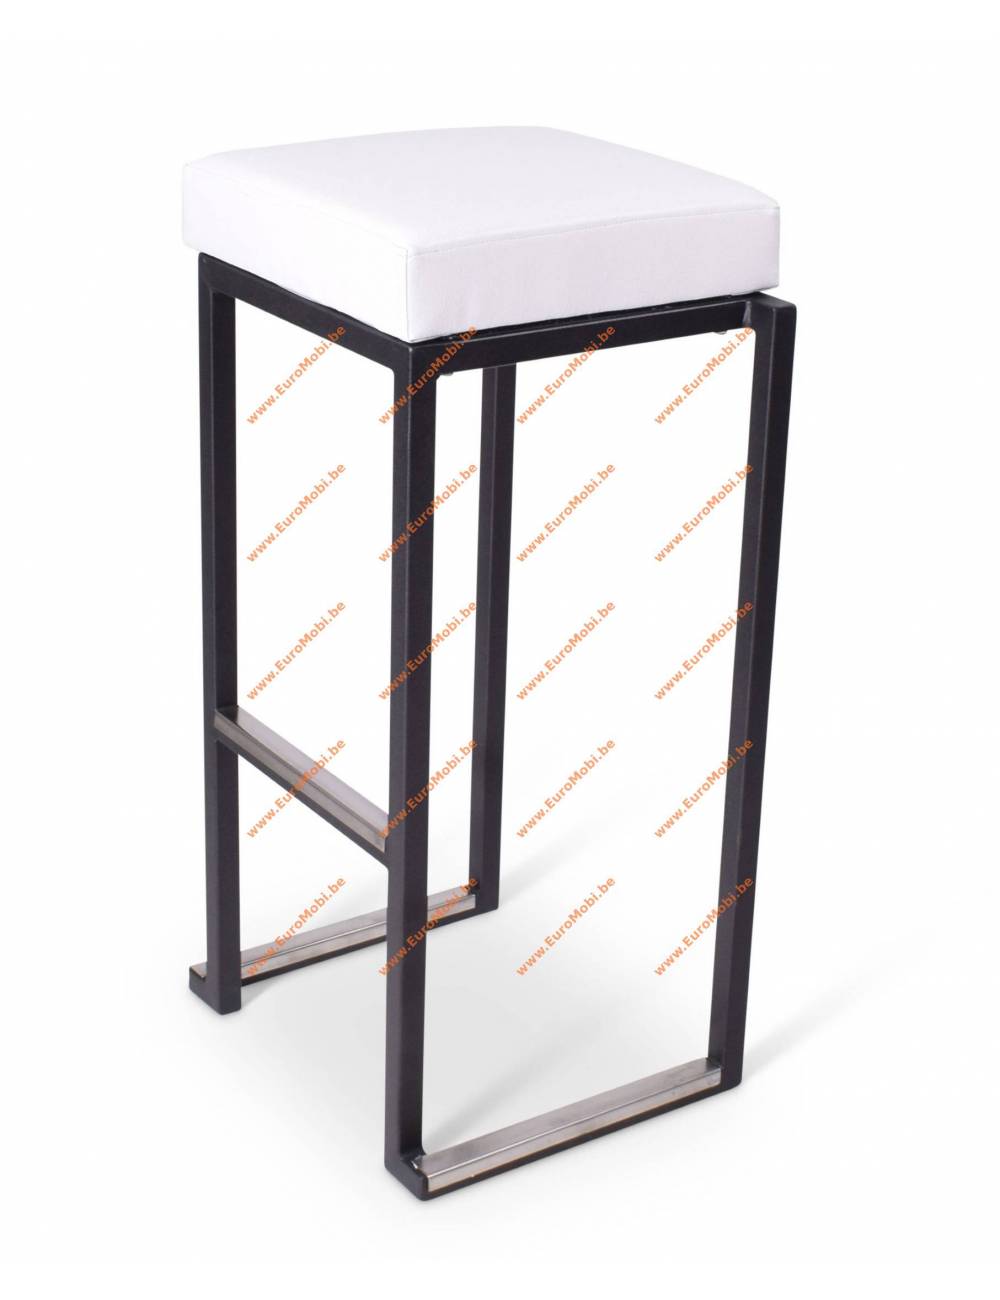 Tabouret Tab Square assise blanche , structure noire